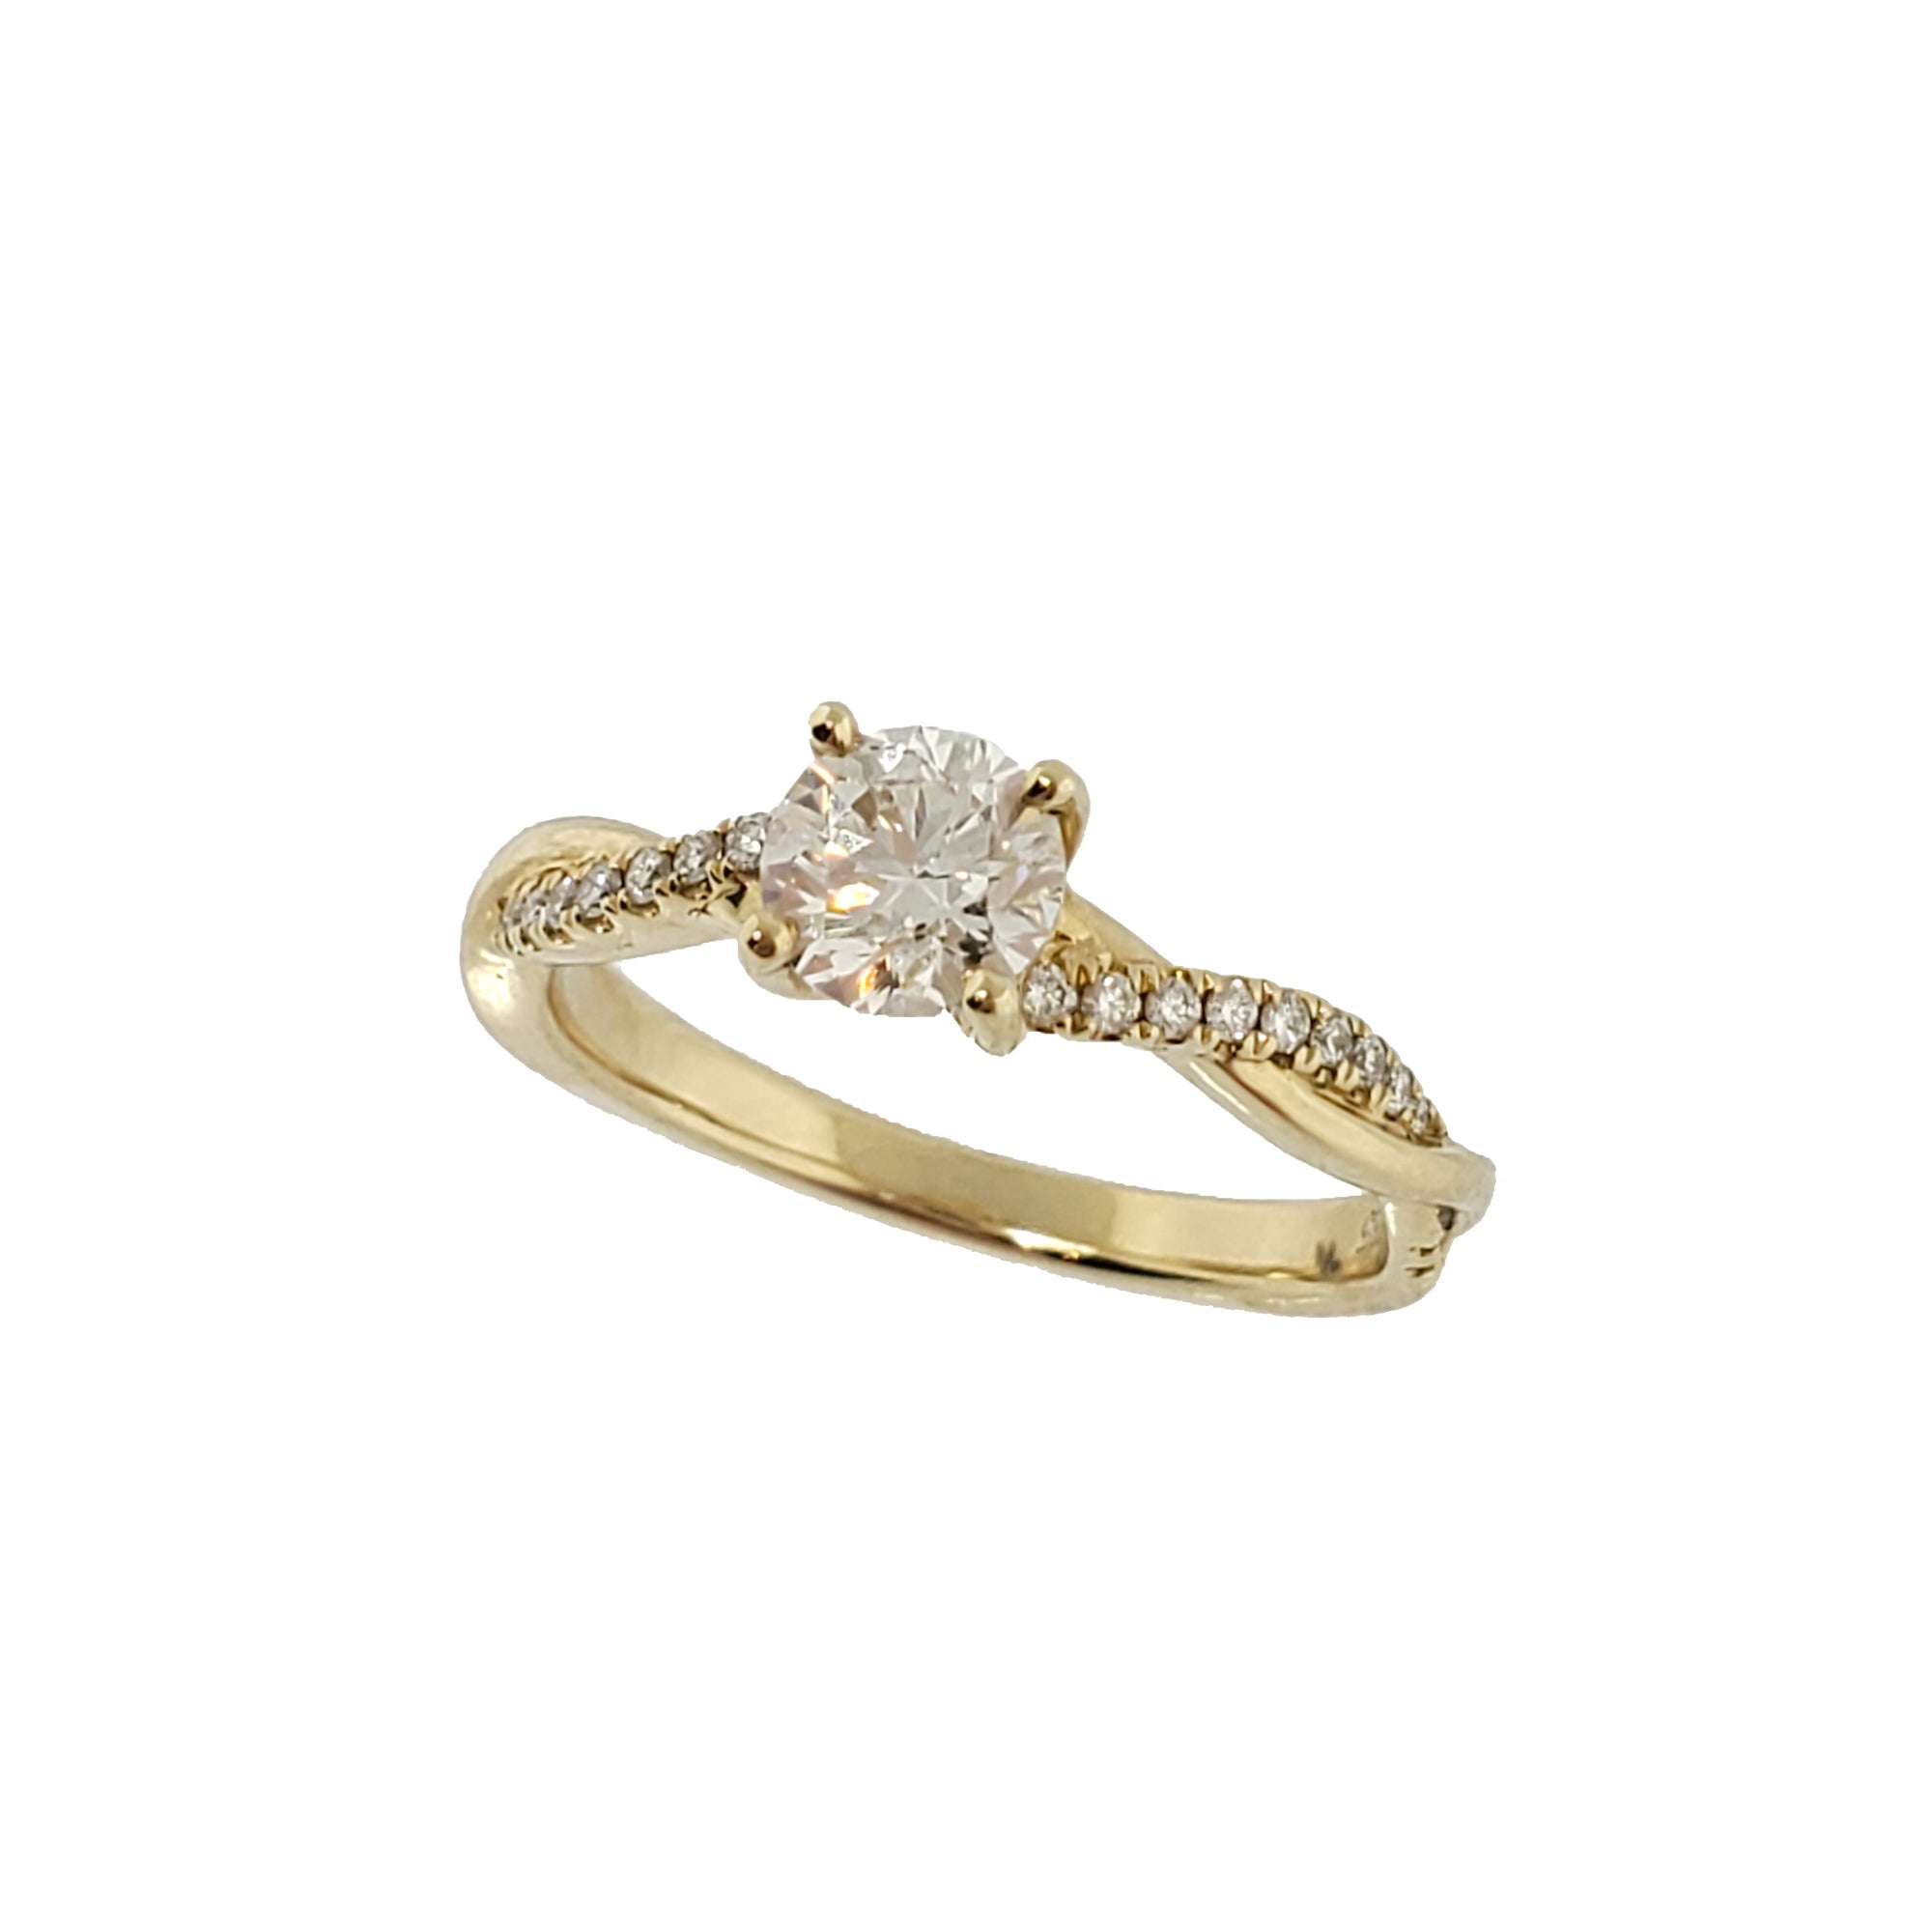 14K Y/G Twisted Shank Diamond Ring with Diamond Accent